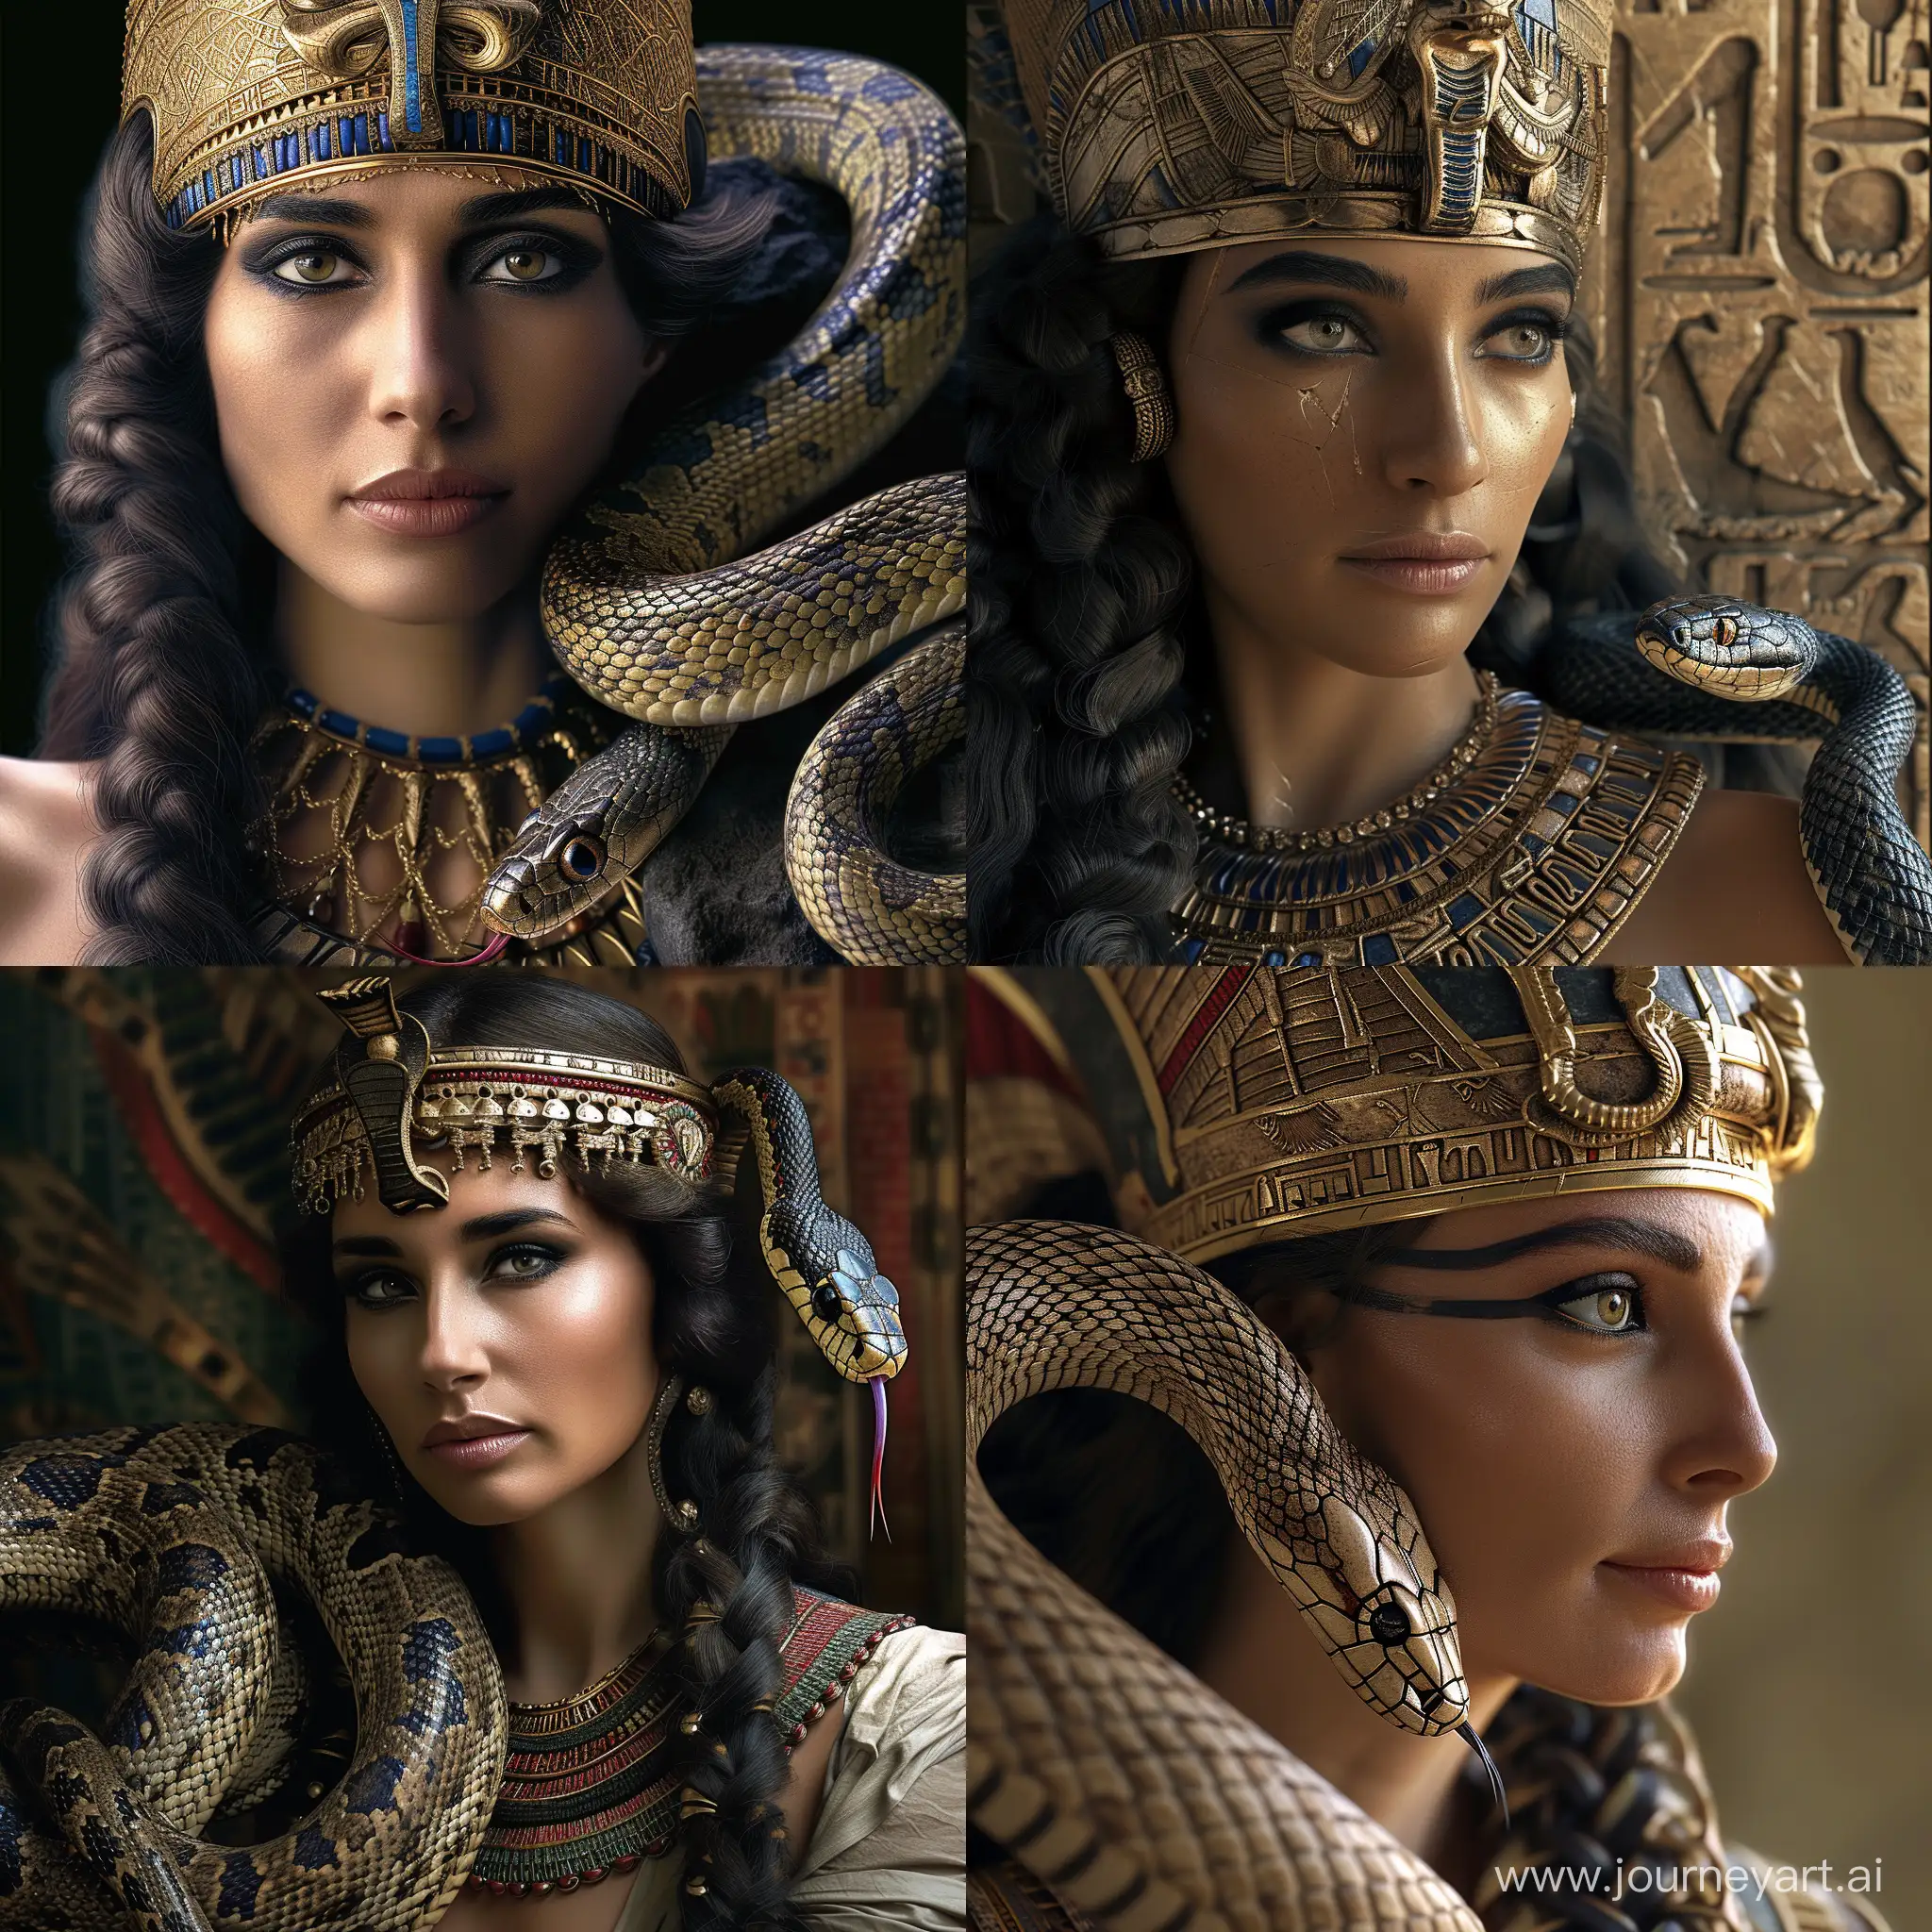 Portrait of Cleopatra VII and an Egyptian Cobra Asp. Impressive detailed realistic image.